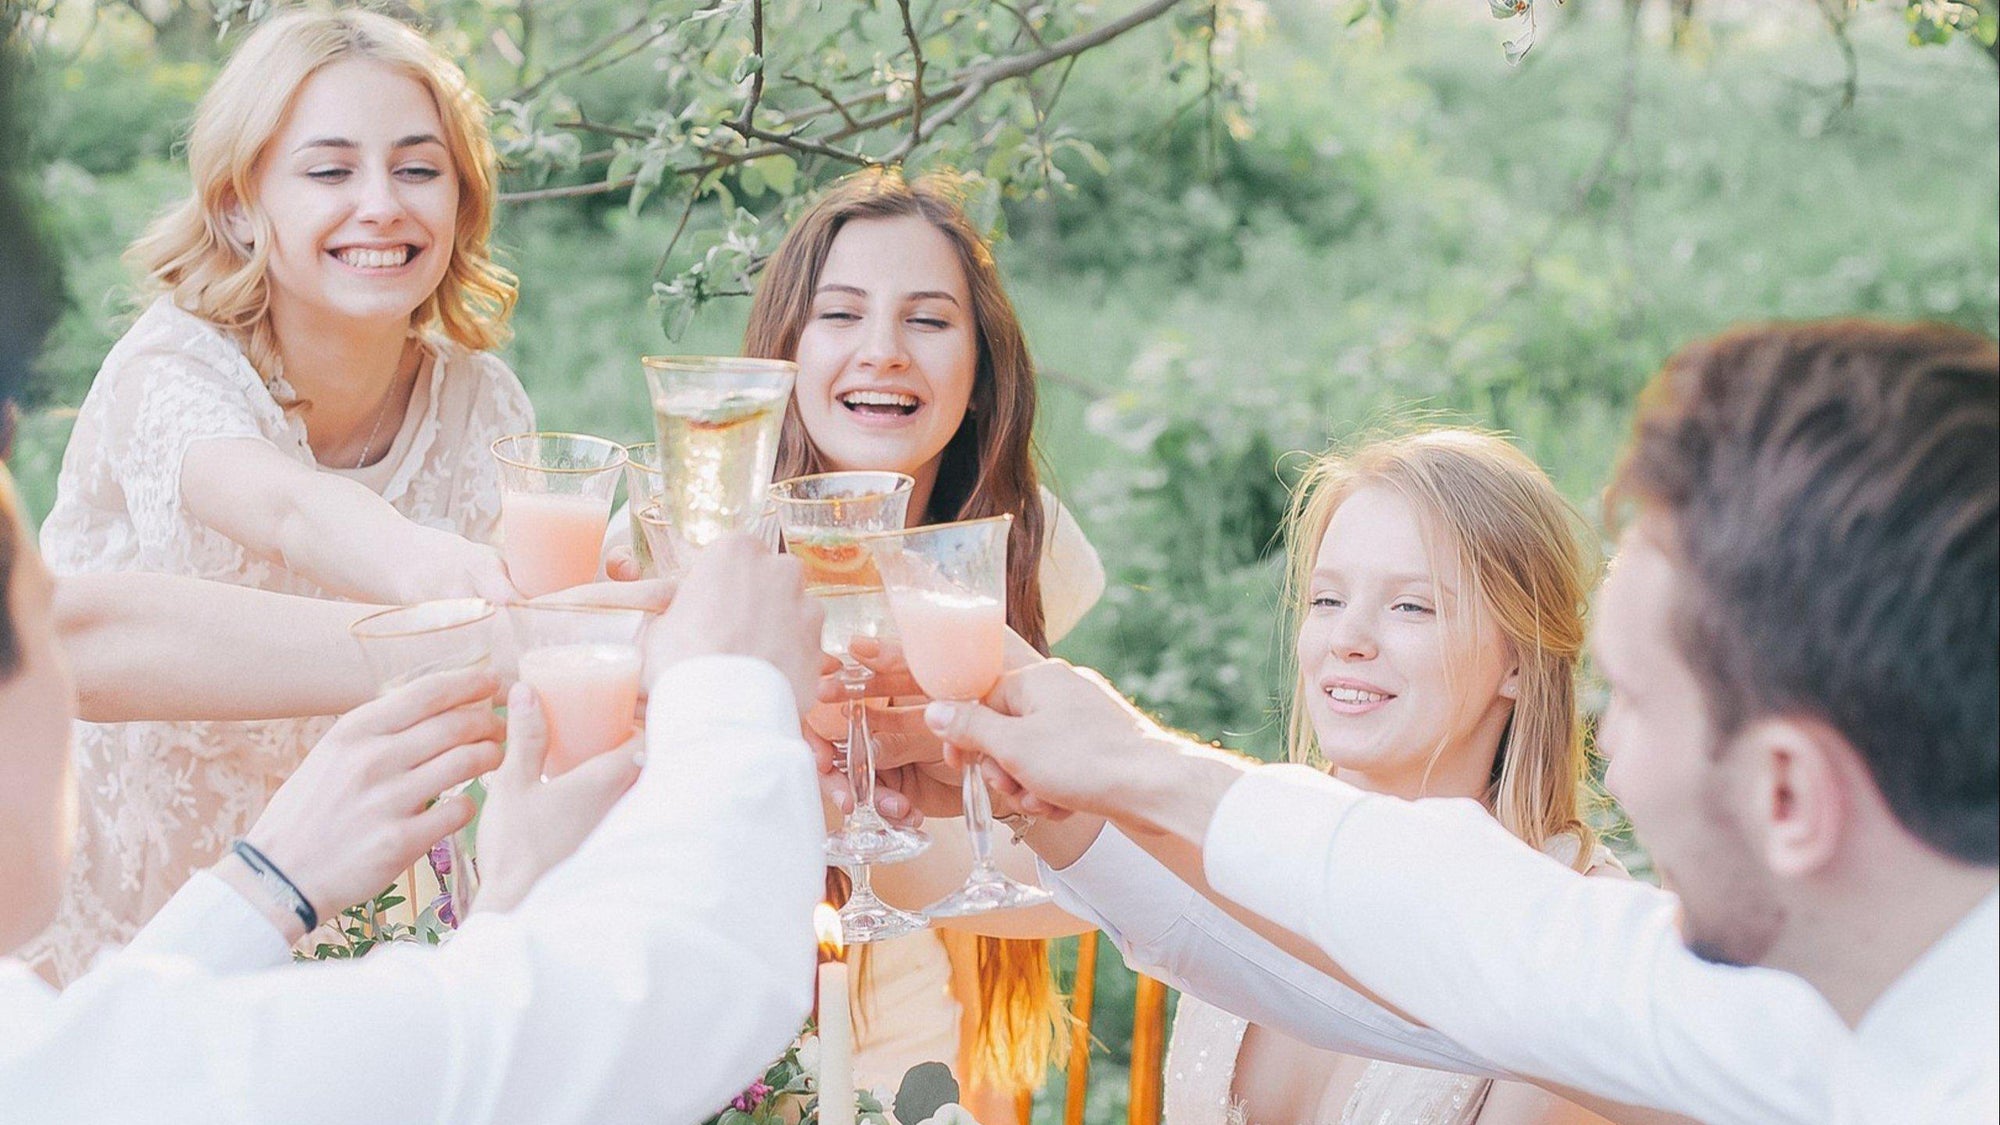 10 Secrets to Hosting a Soiree Party Your Friends Will Rave About